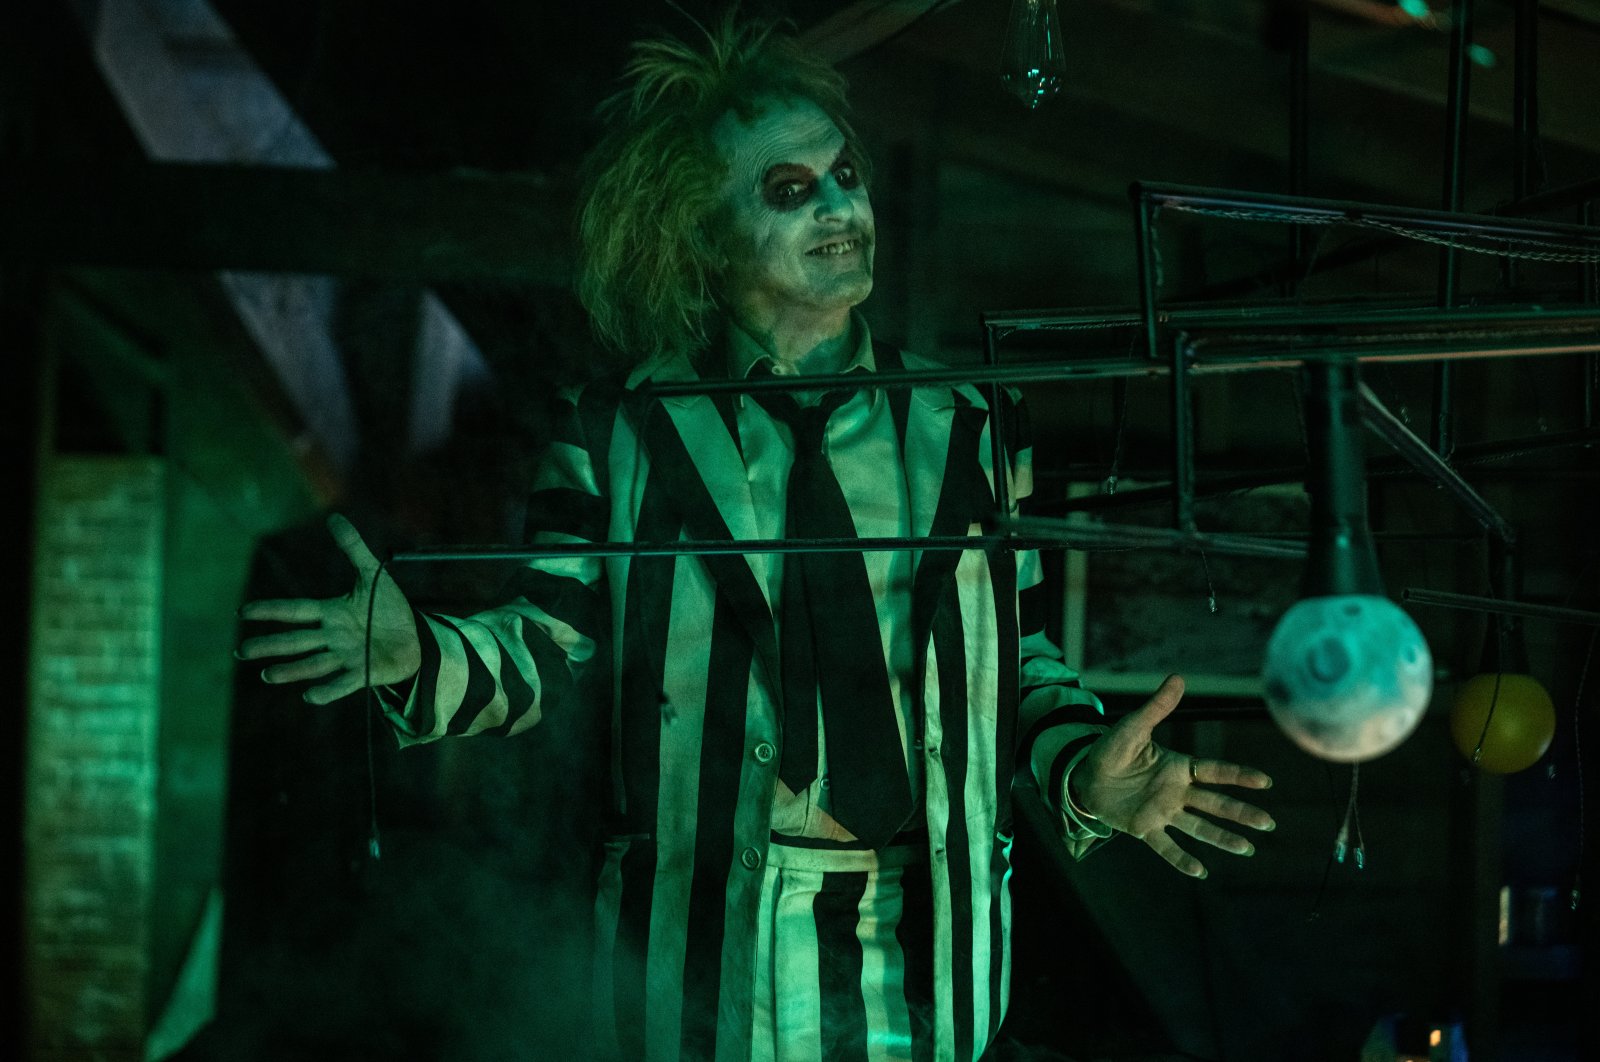 Michael Keaton returns to one of his best-known roles in &quot;Beetlejuice Beetlejuice,&quot; set for release in September. (dpa Photo)